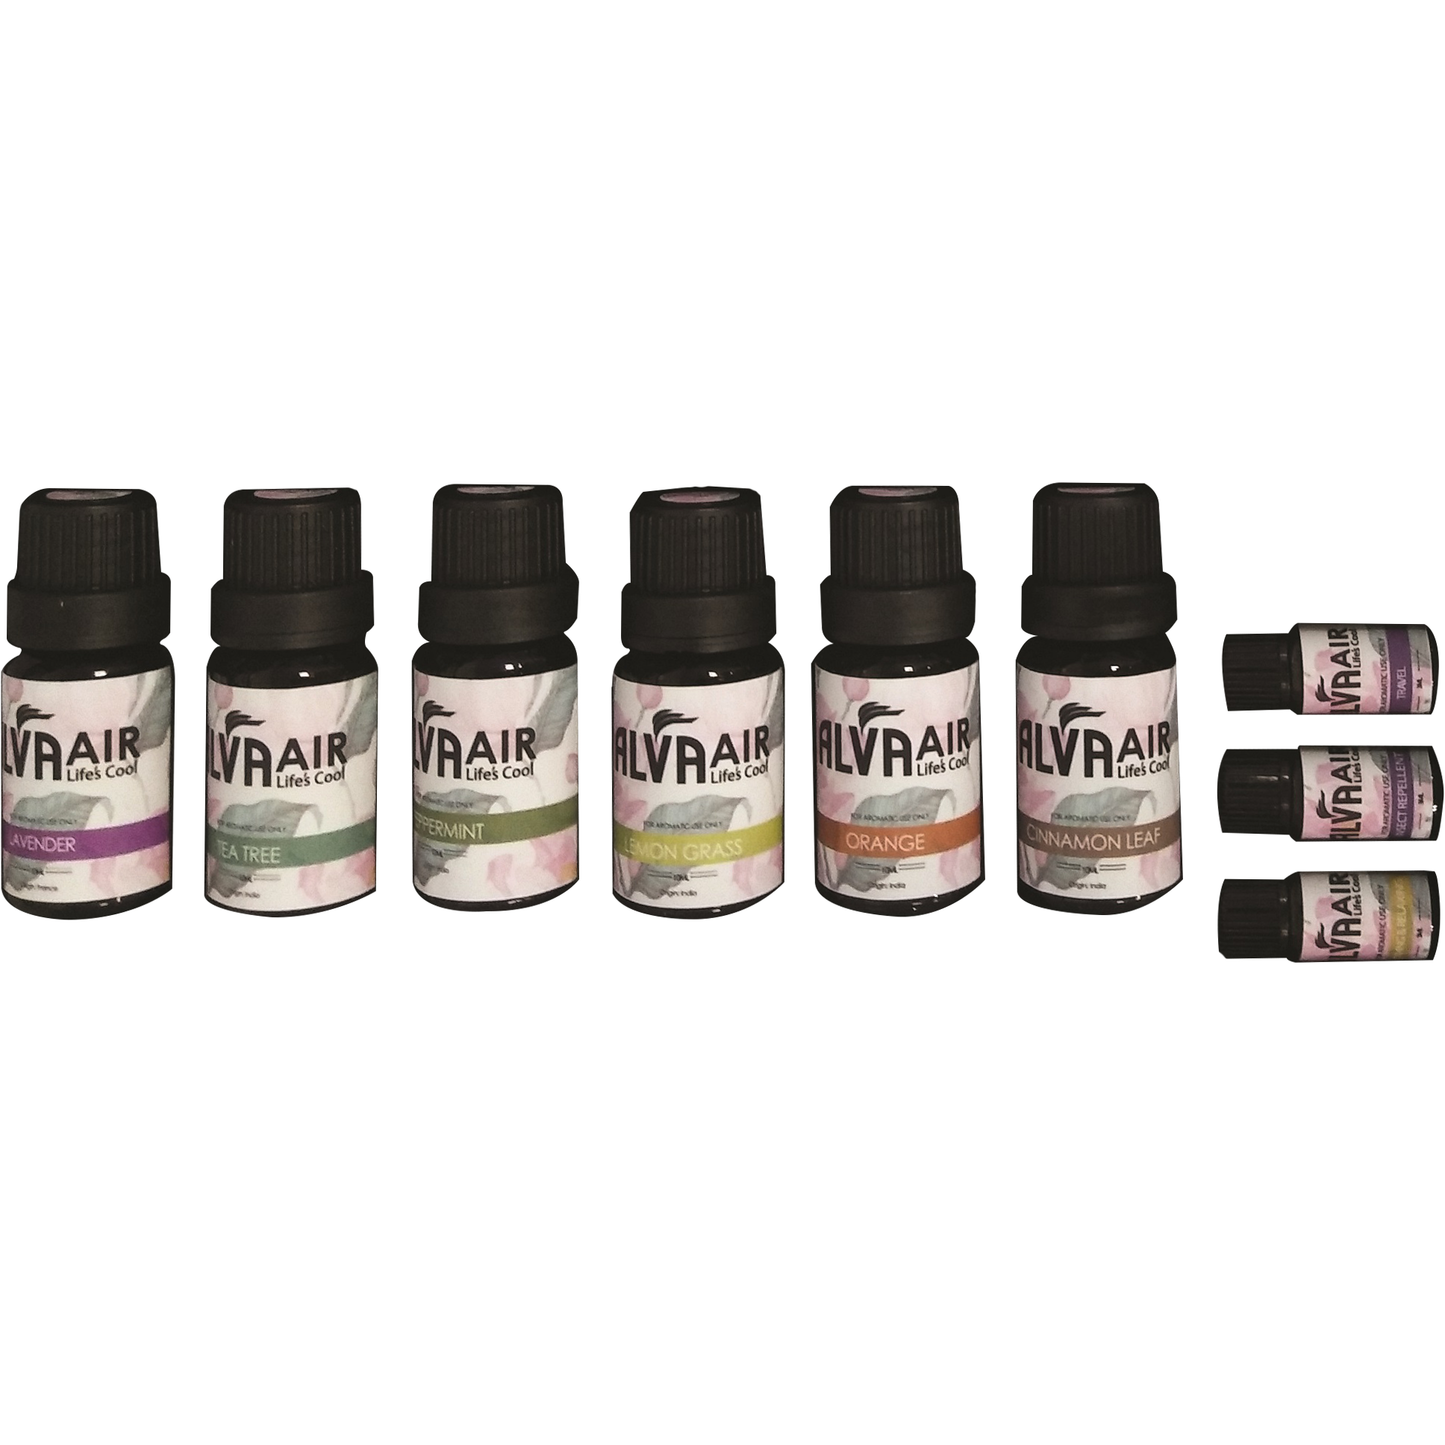 9PC ESSENTIAL OILS SET - FOR AROMATHERAPY DIFFUSERS